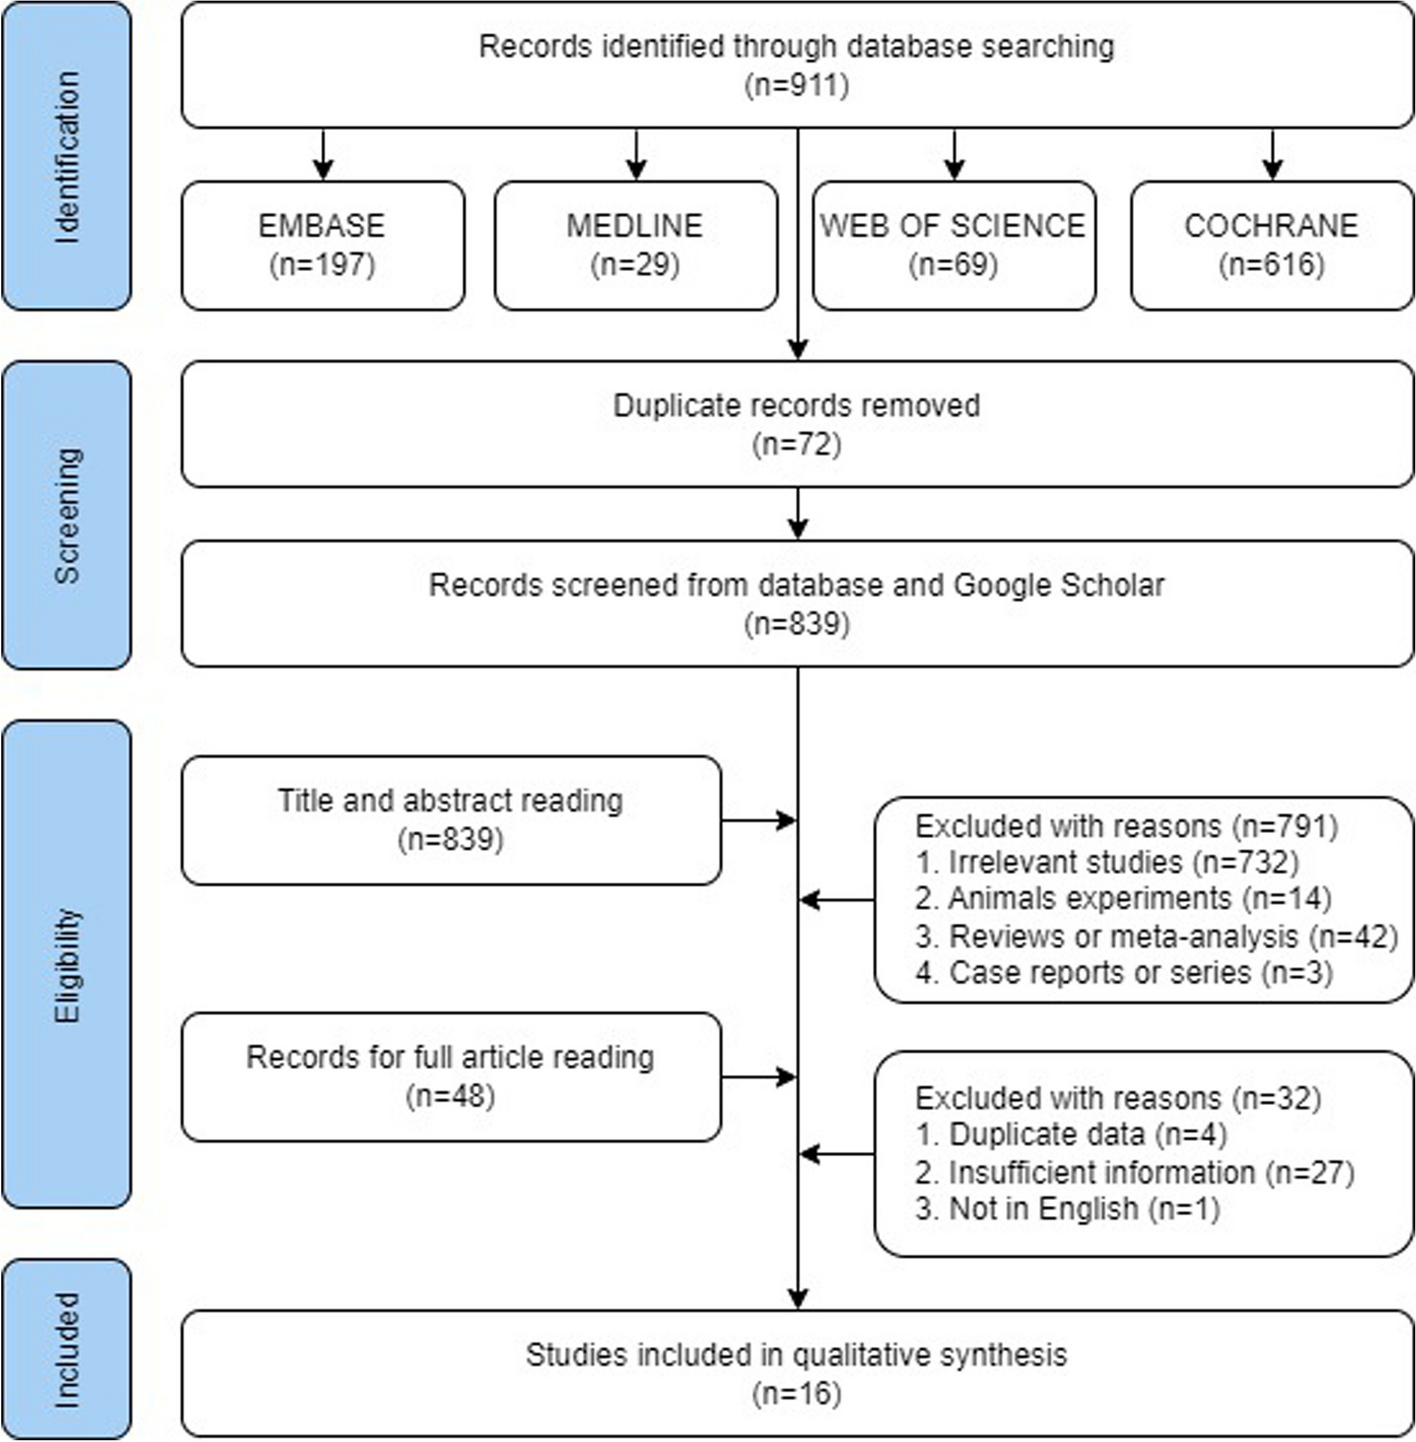 The prevalence of sarcopenia in spondyloarthritis patients: a meta-analysis